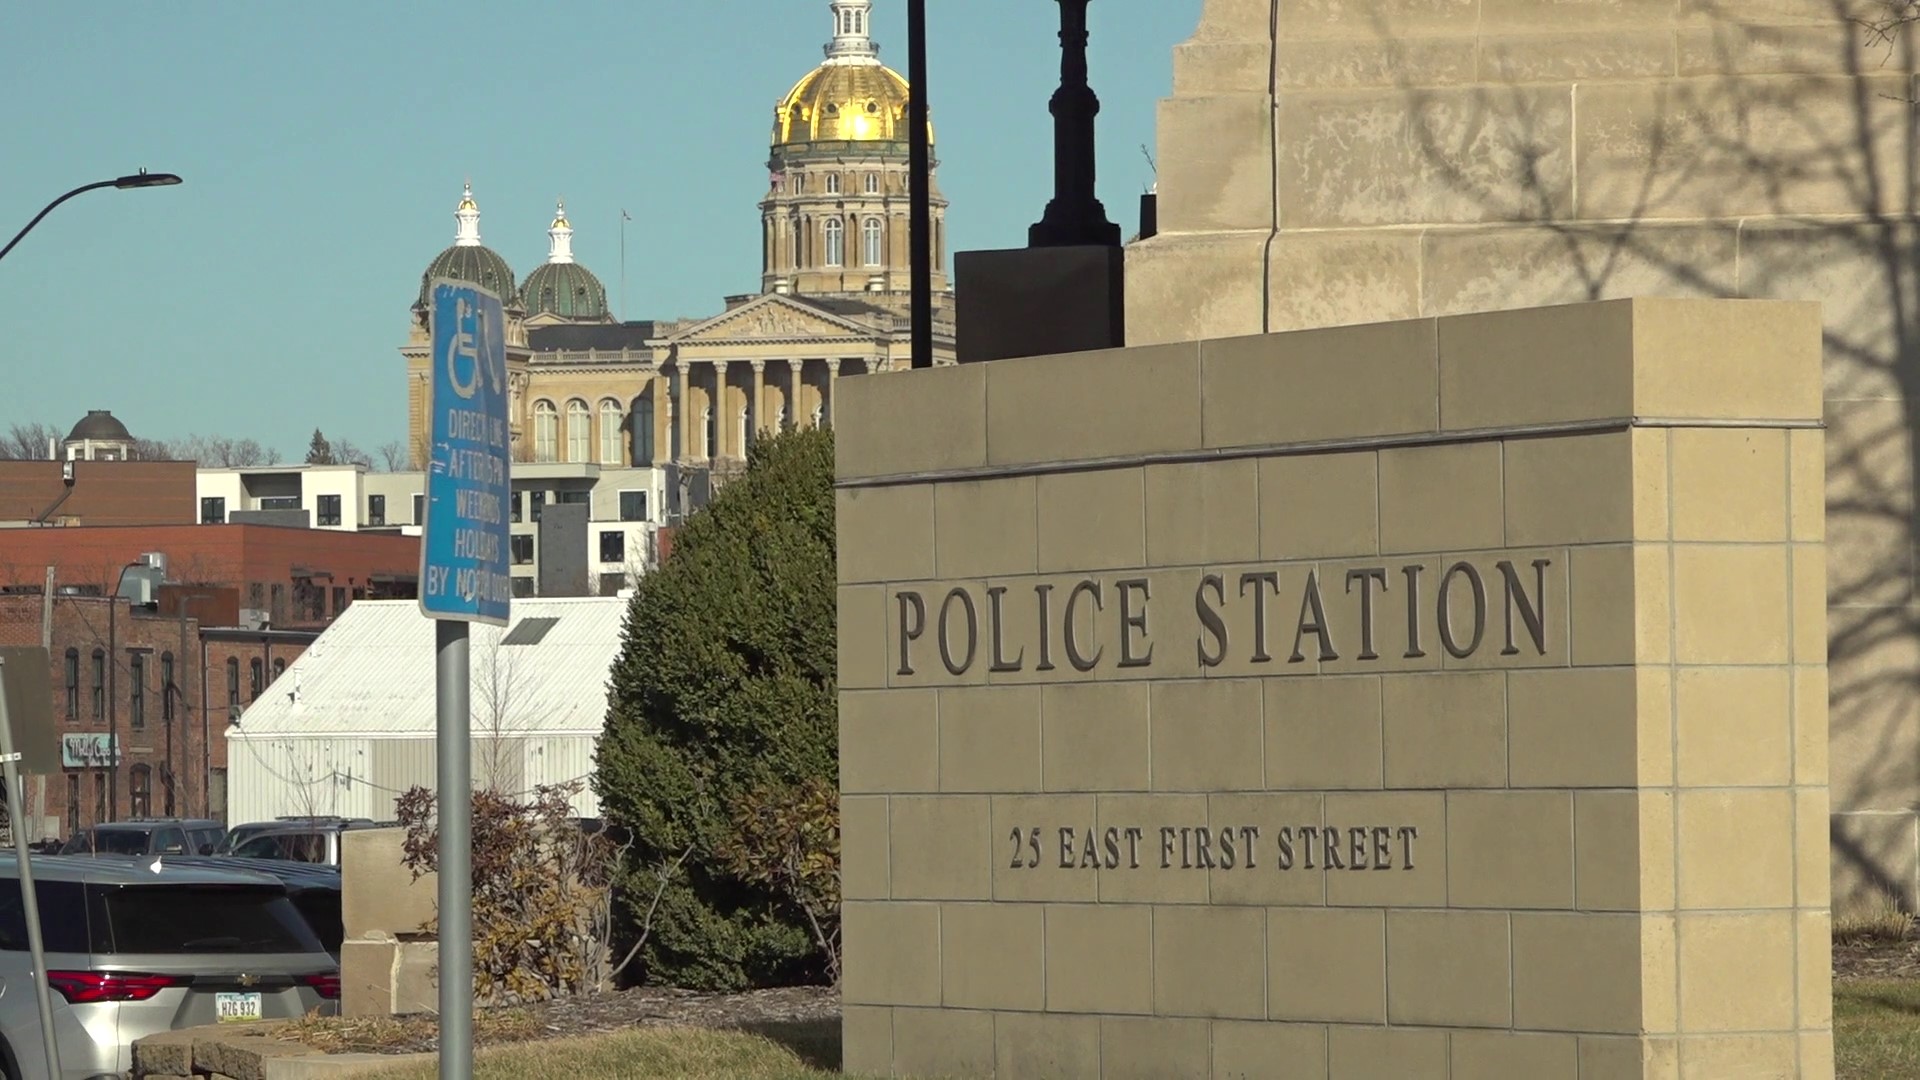 Over 1,000 mental health calls didn't designate need for Des Moines police, because no threat was detected, meaning mental health units responded instead.